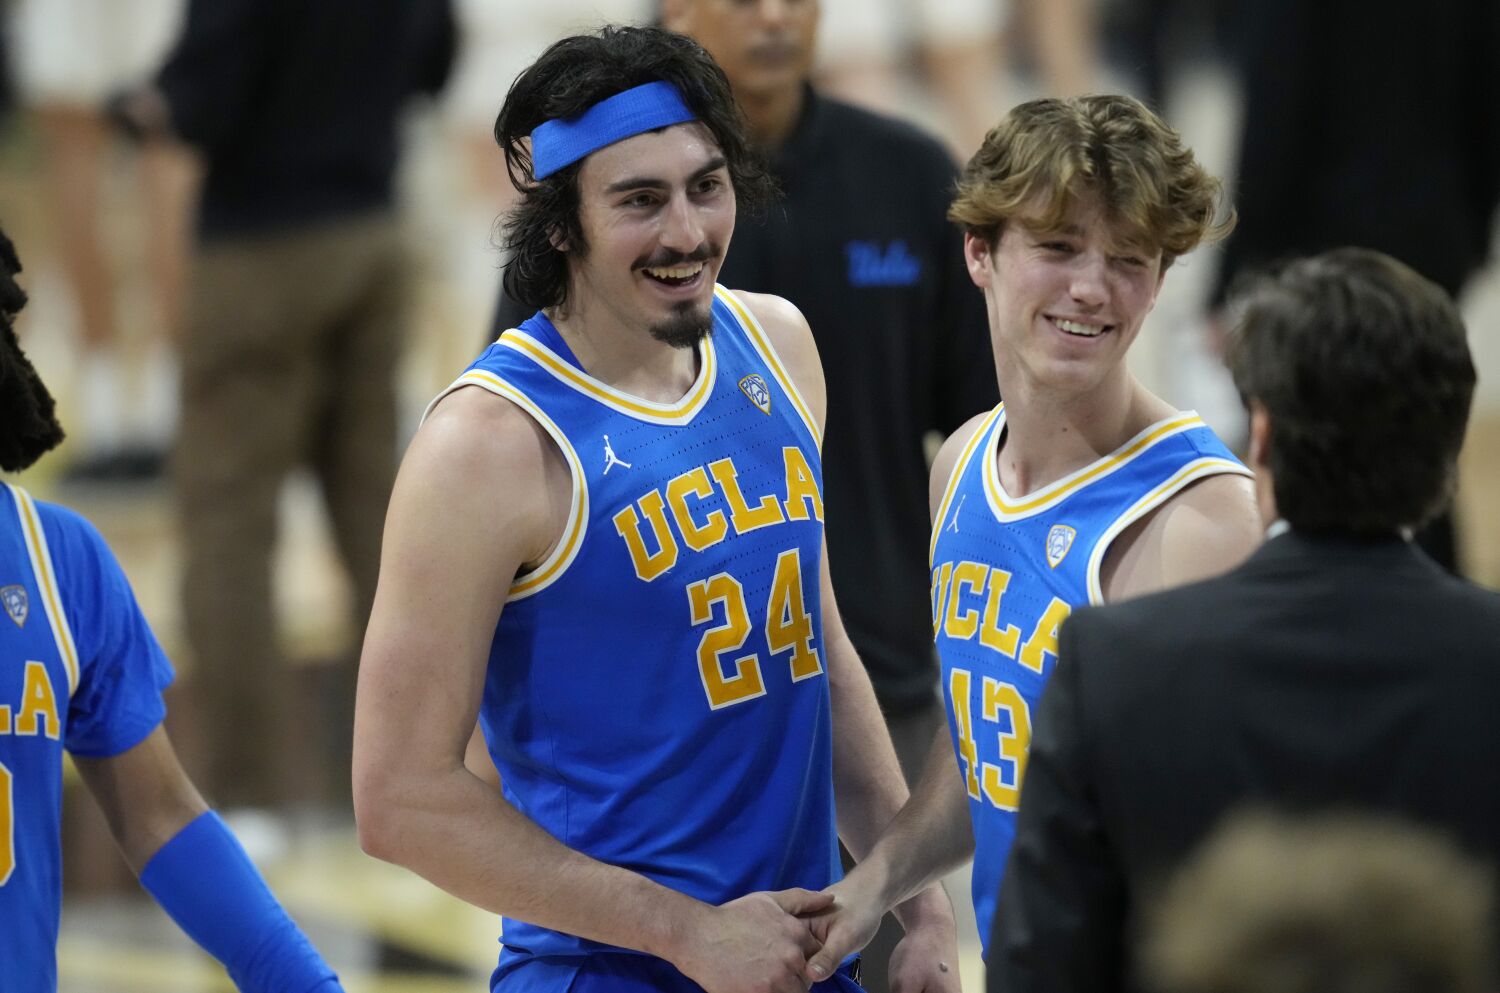 UCLA defeats Colorado to clinch its first Pac-12 championship in a decade